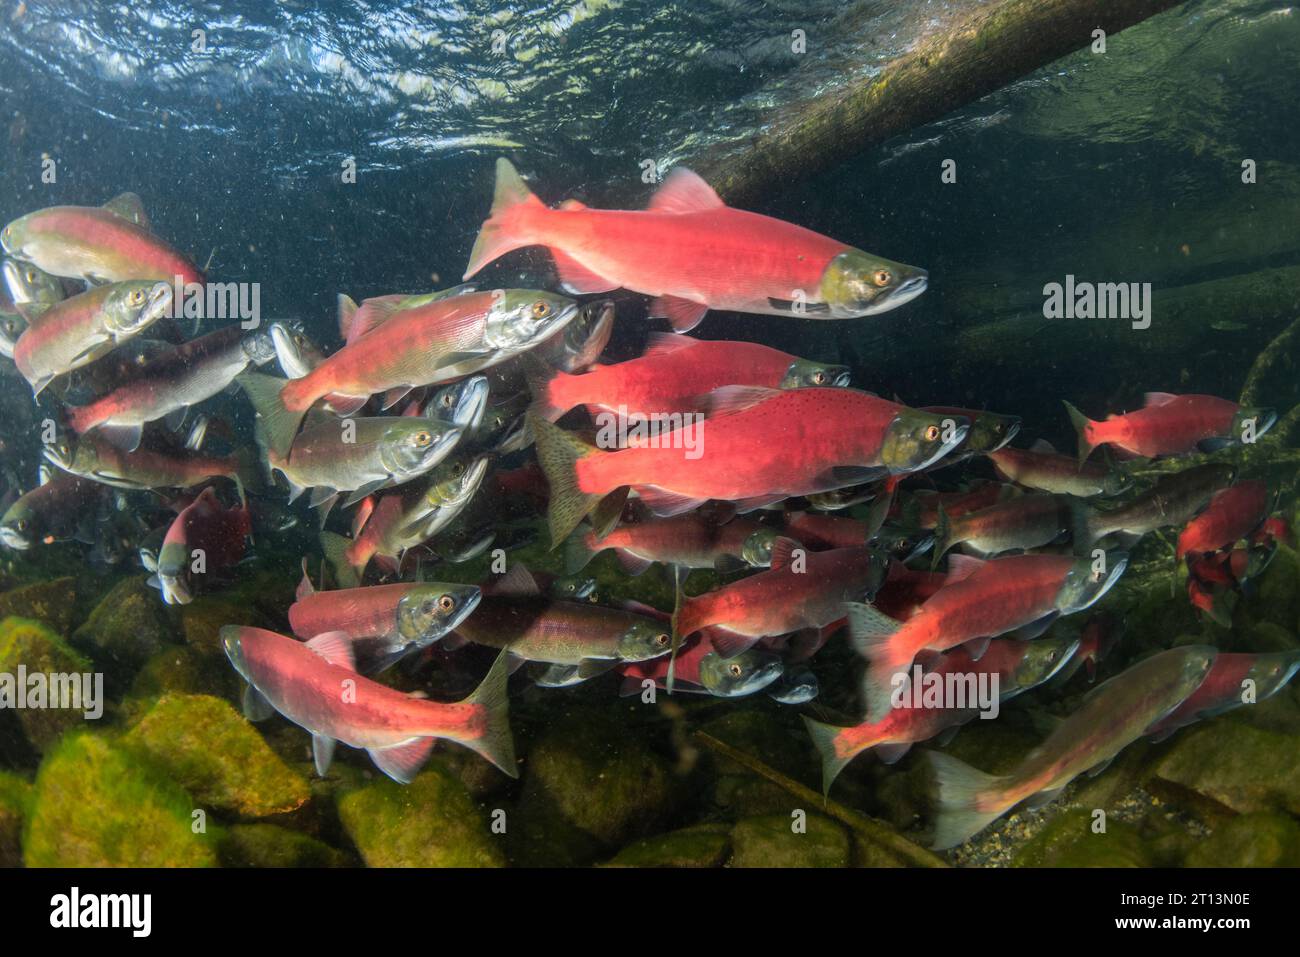 kokanee salmon (Oncorhynchus nerka), the fish are schooling together and migrating upriver for spawning and complete their lifecycle. Stock Photo